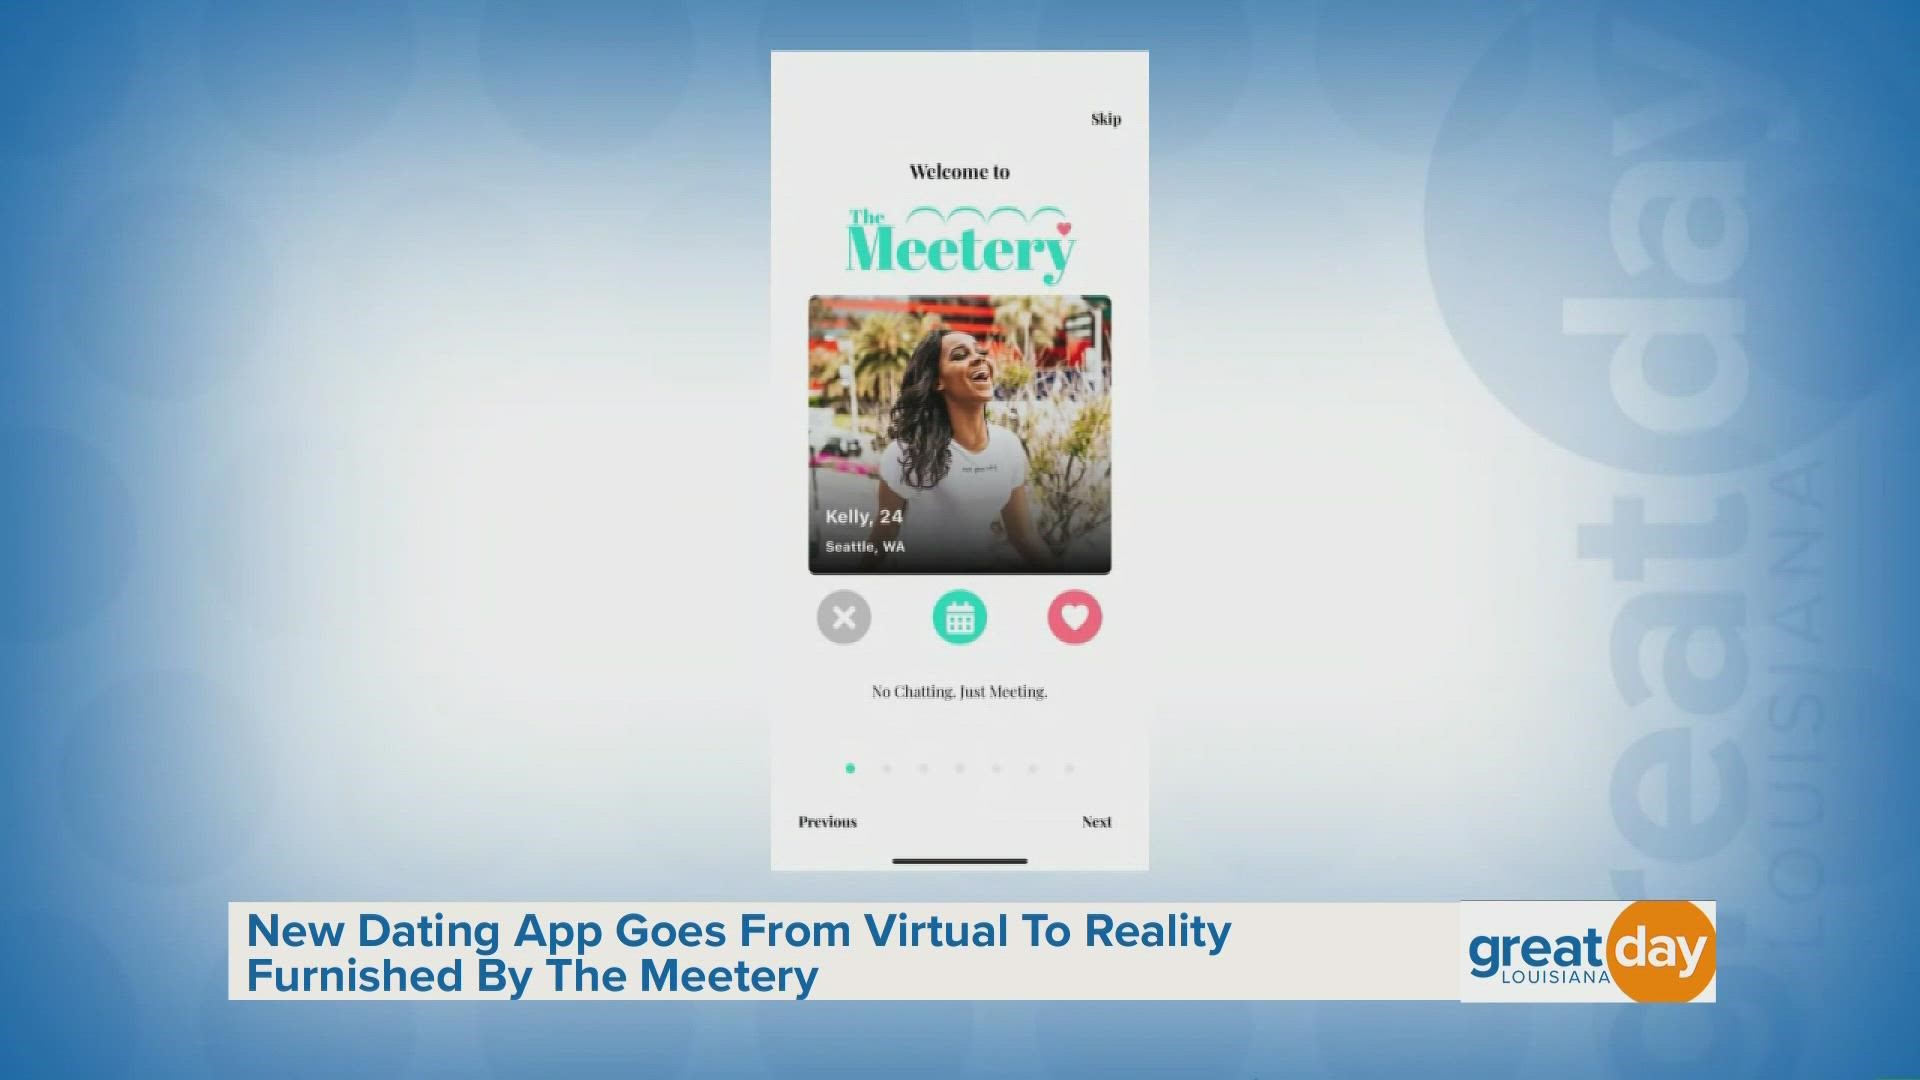 The creators of "The Meetery" dating app shared details about how it works and what users can expect when you download it.